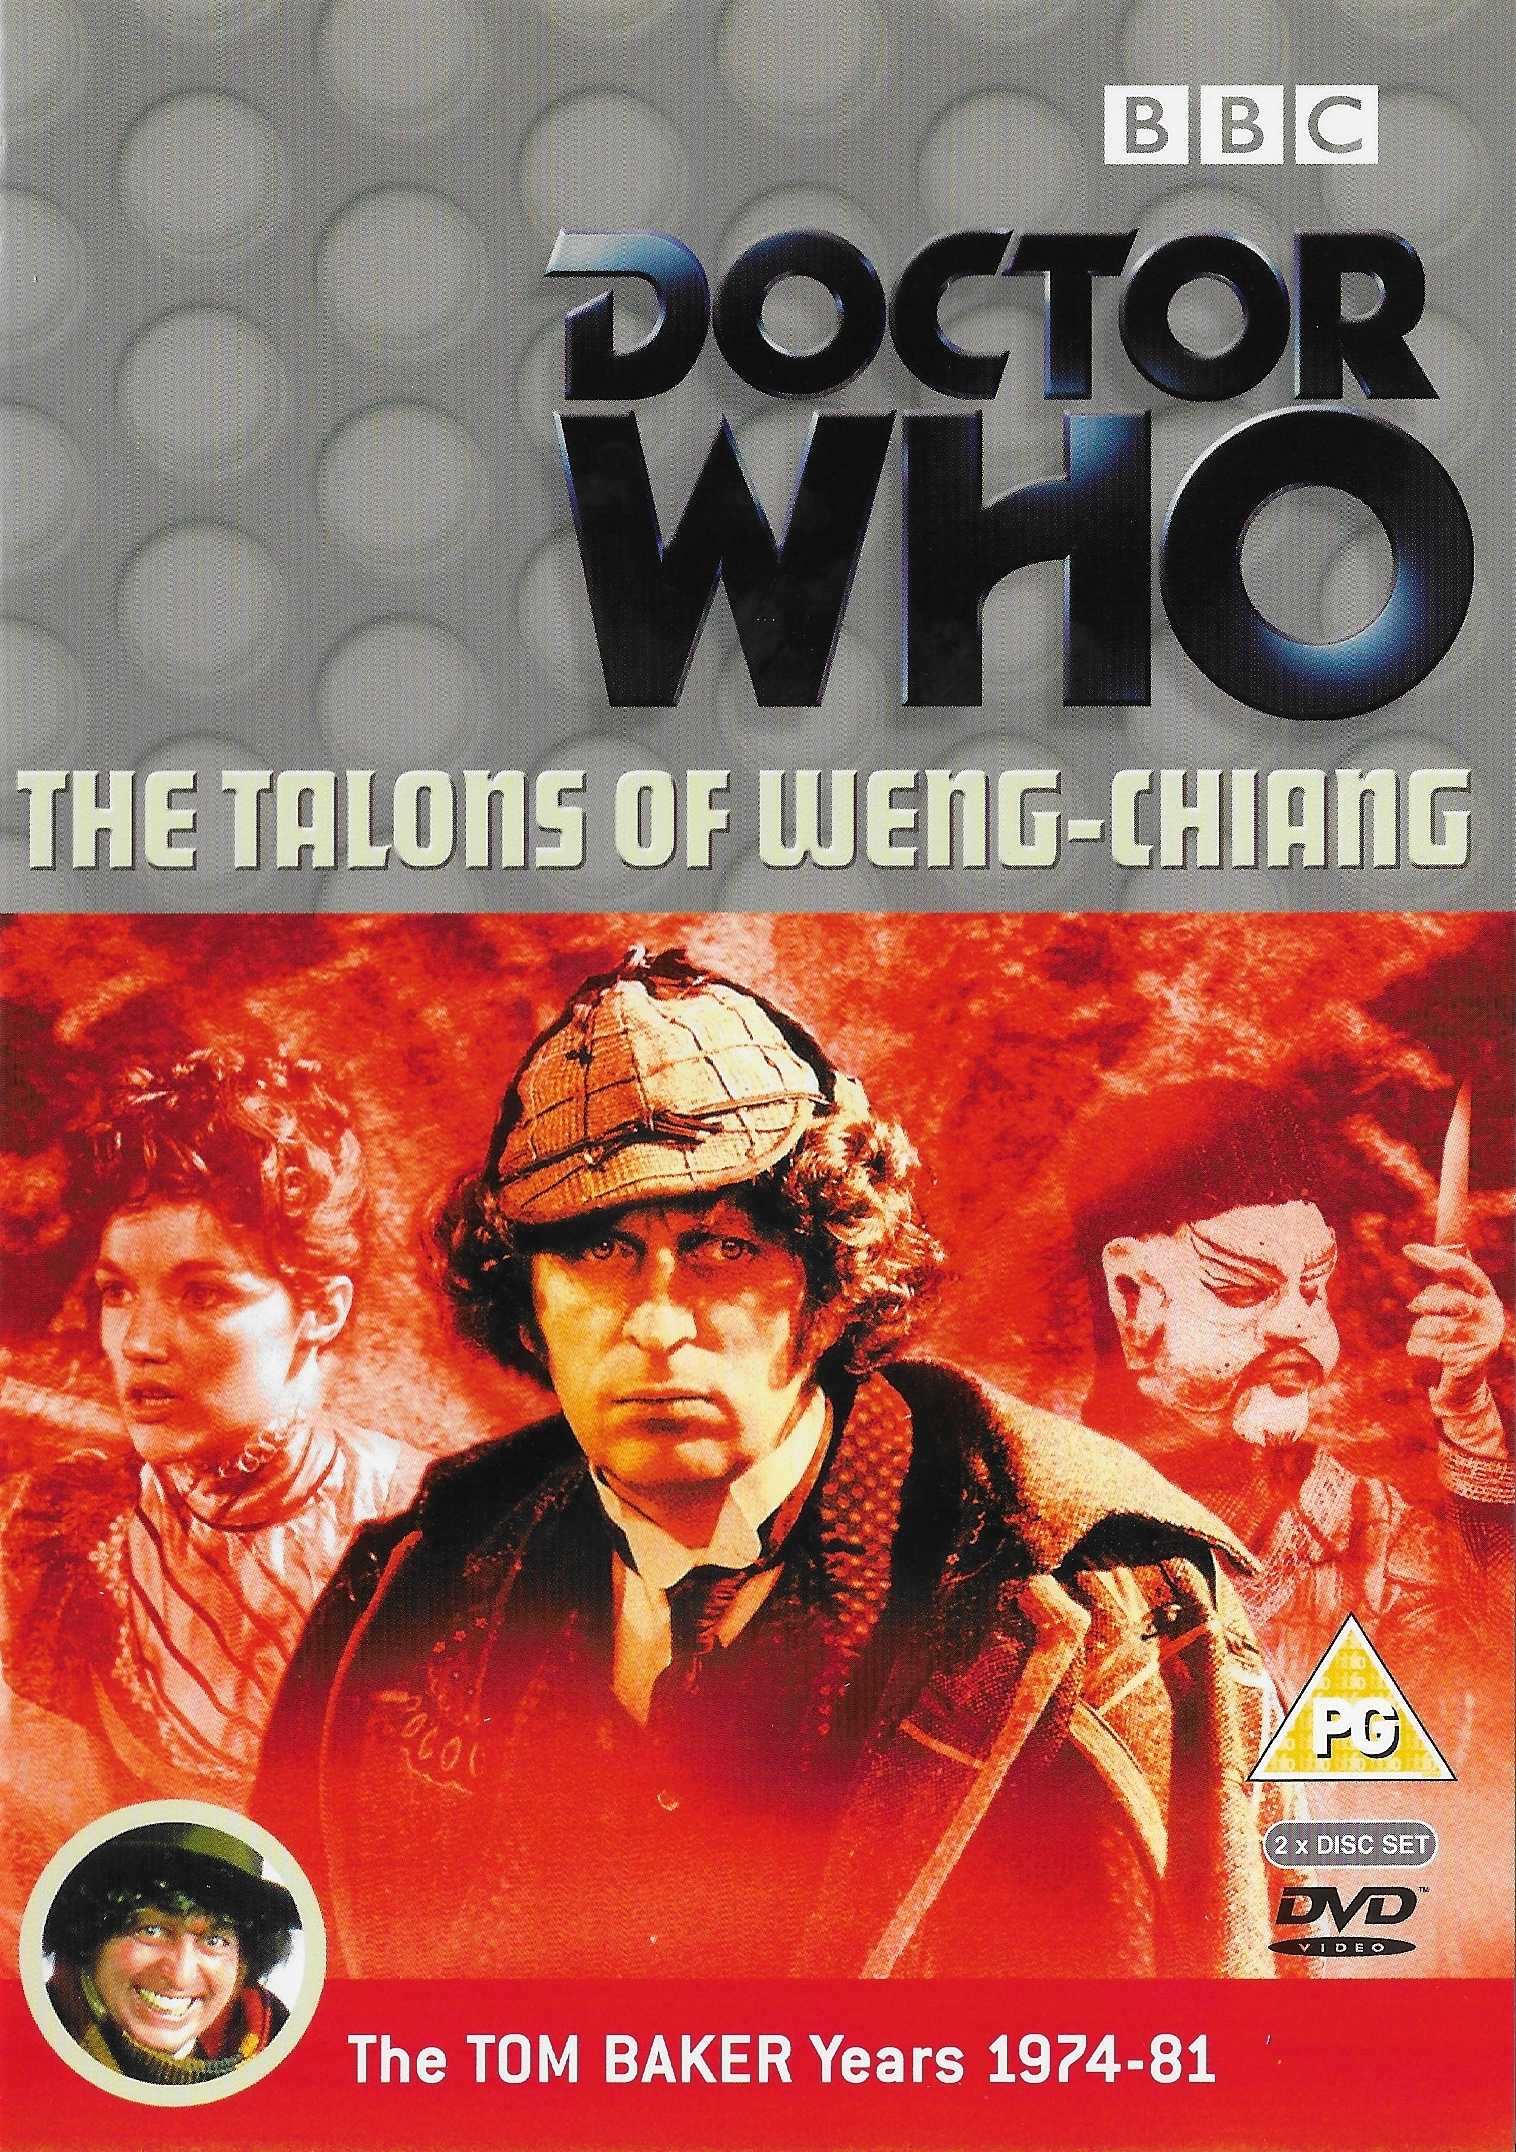 Picture of BBCDVD 1152 Doctor Who - The talons of Weng-Chiang DVD by artist Robert Holmes from the BBC records and Tapes library